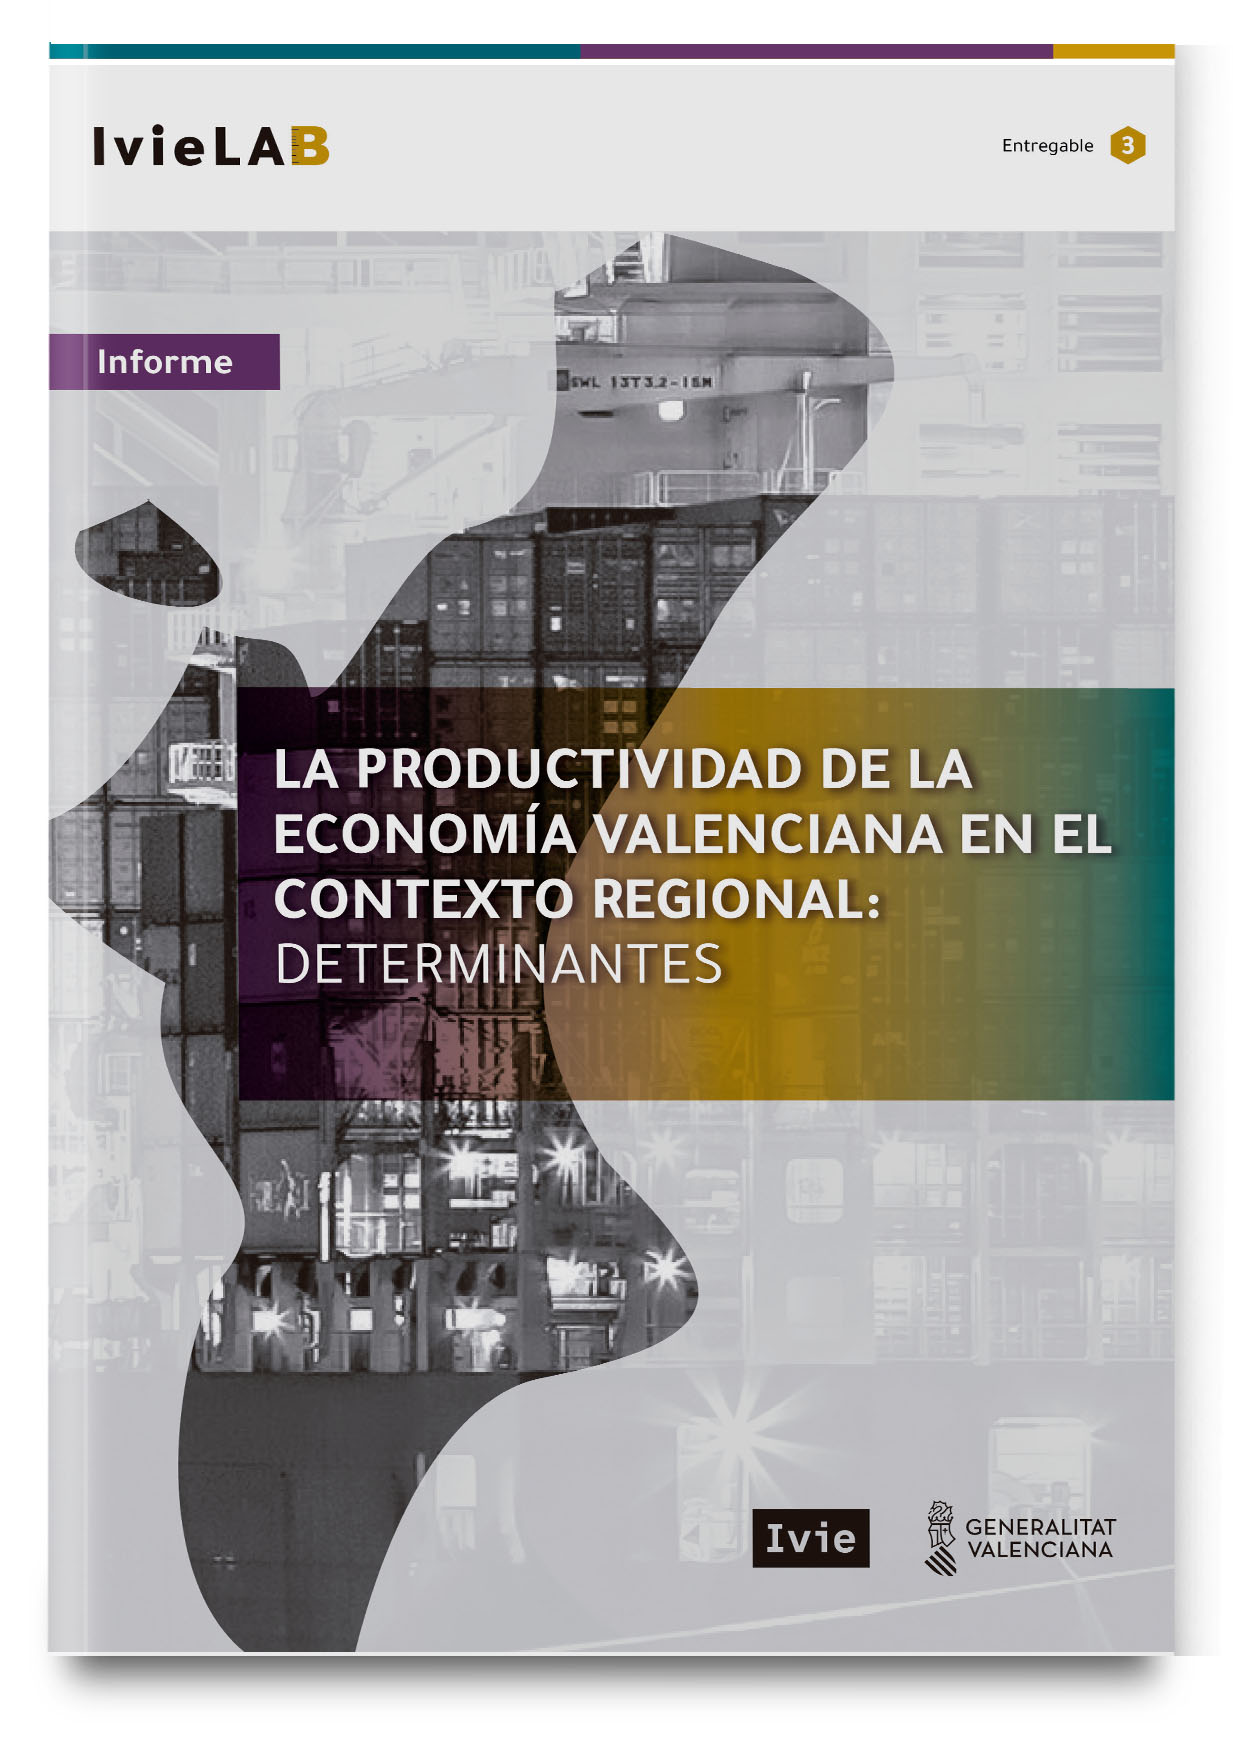 IvieLAB. The determinants of productivity of the Valencian Community in a regional context